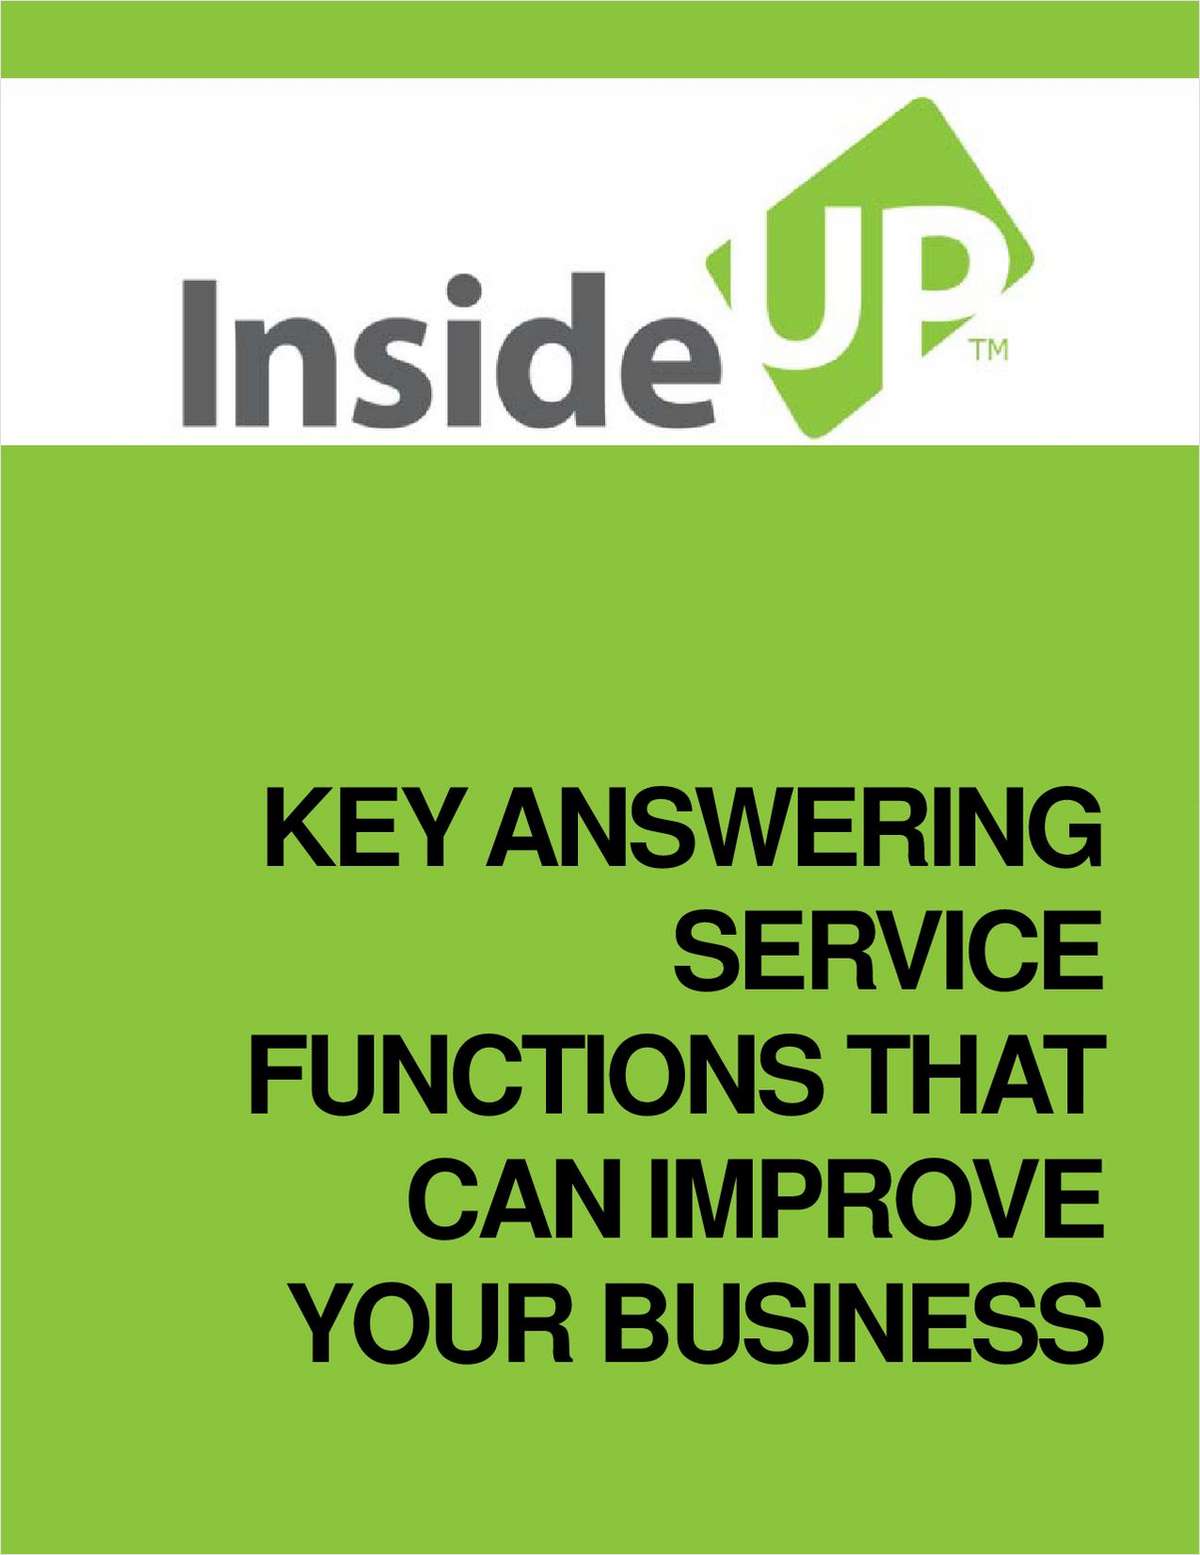 Key Answering Service Functions That Can Improve Your Business